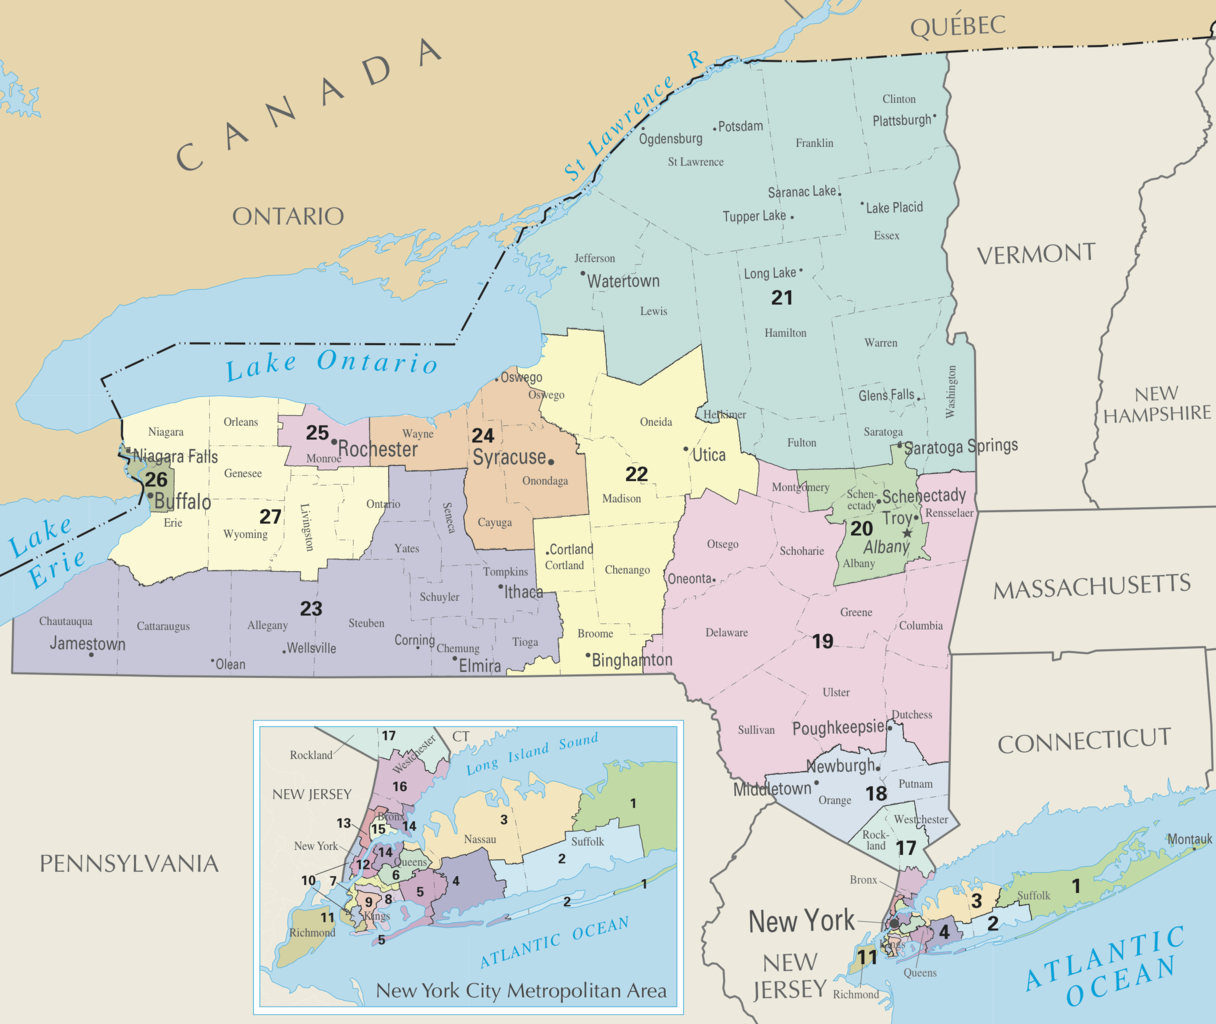 New York s Fourth Congressional District